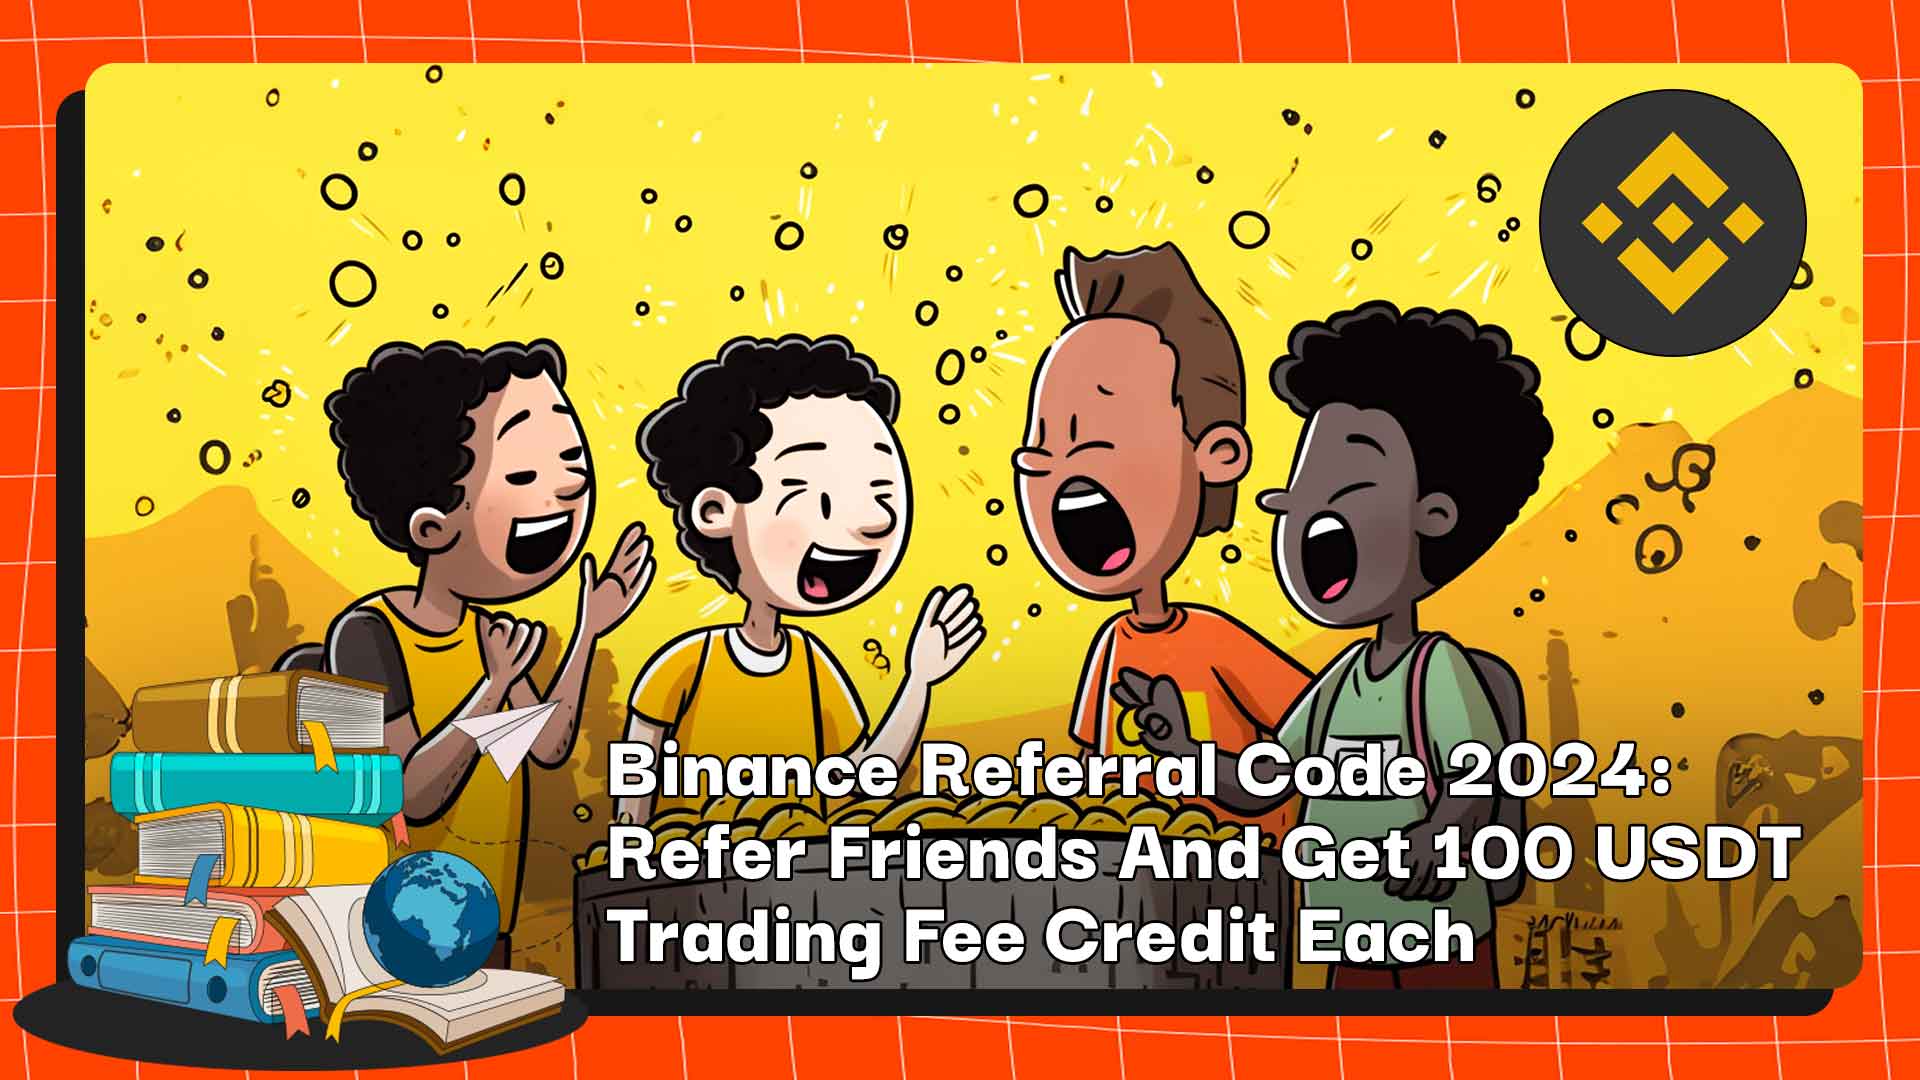 Binance referral code 2024: Refer friends and get up to 100 USDT